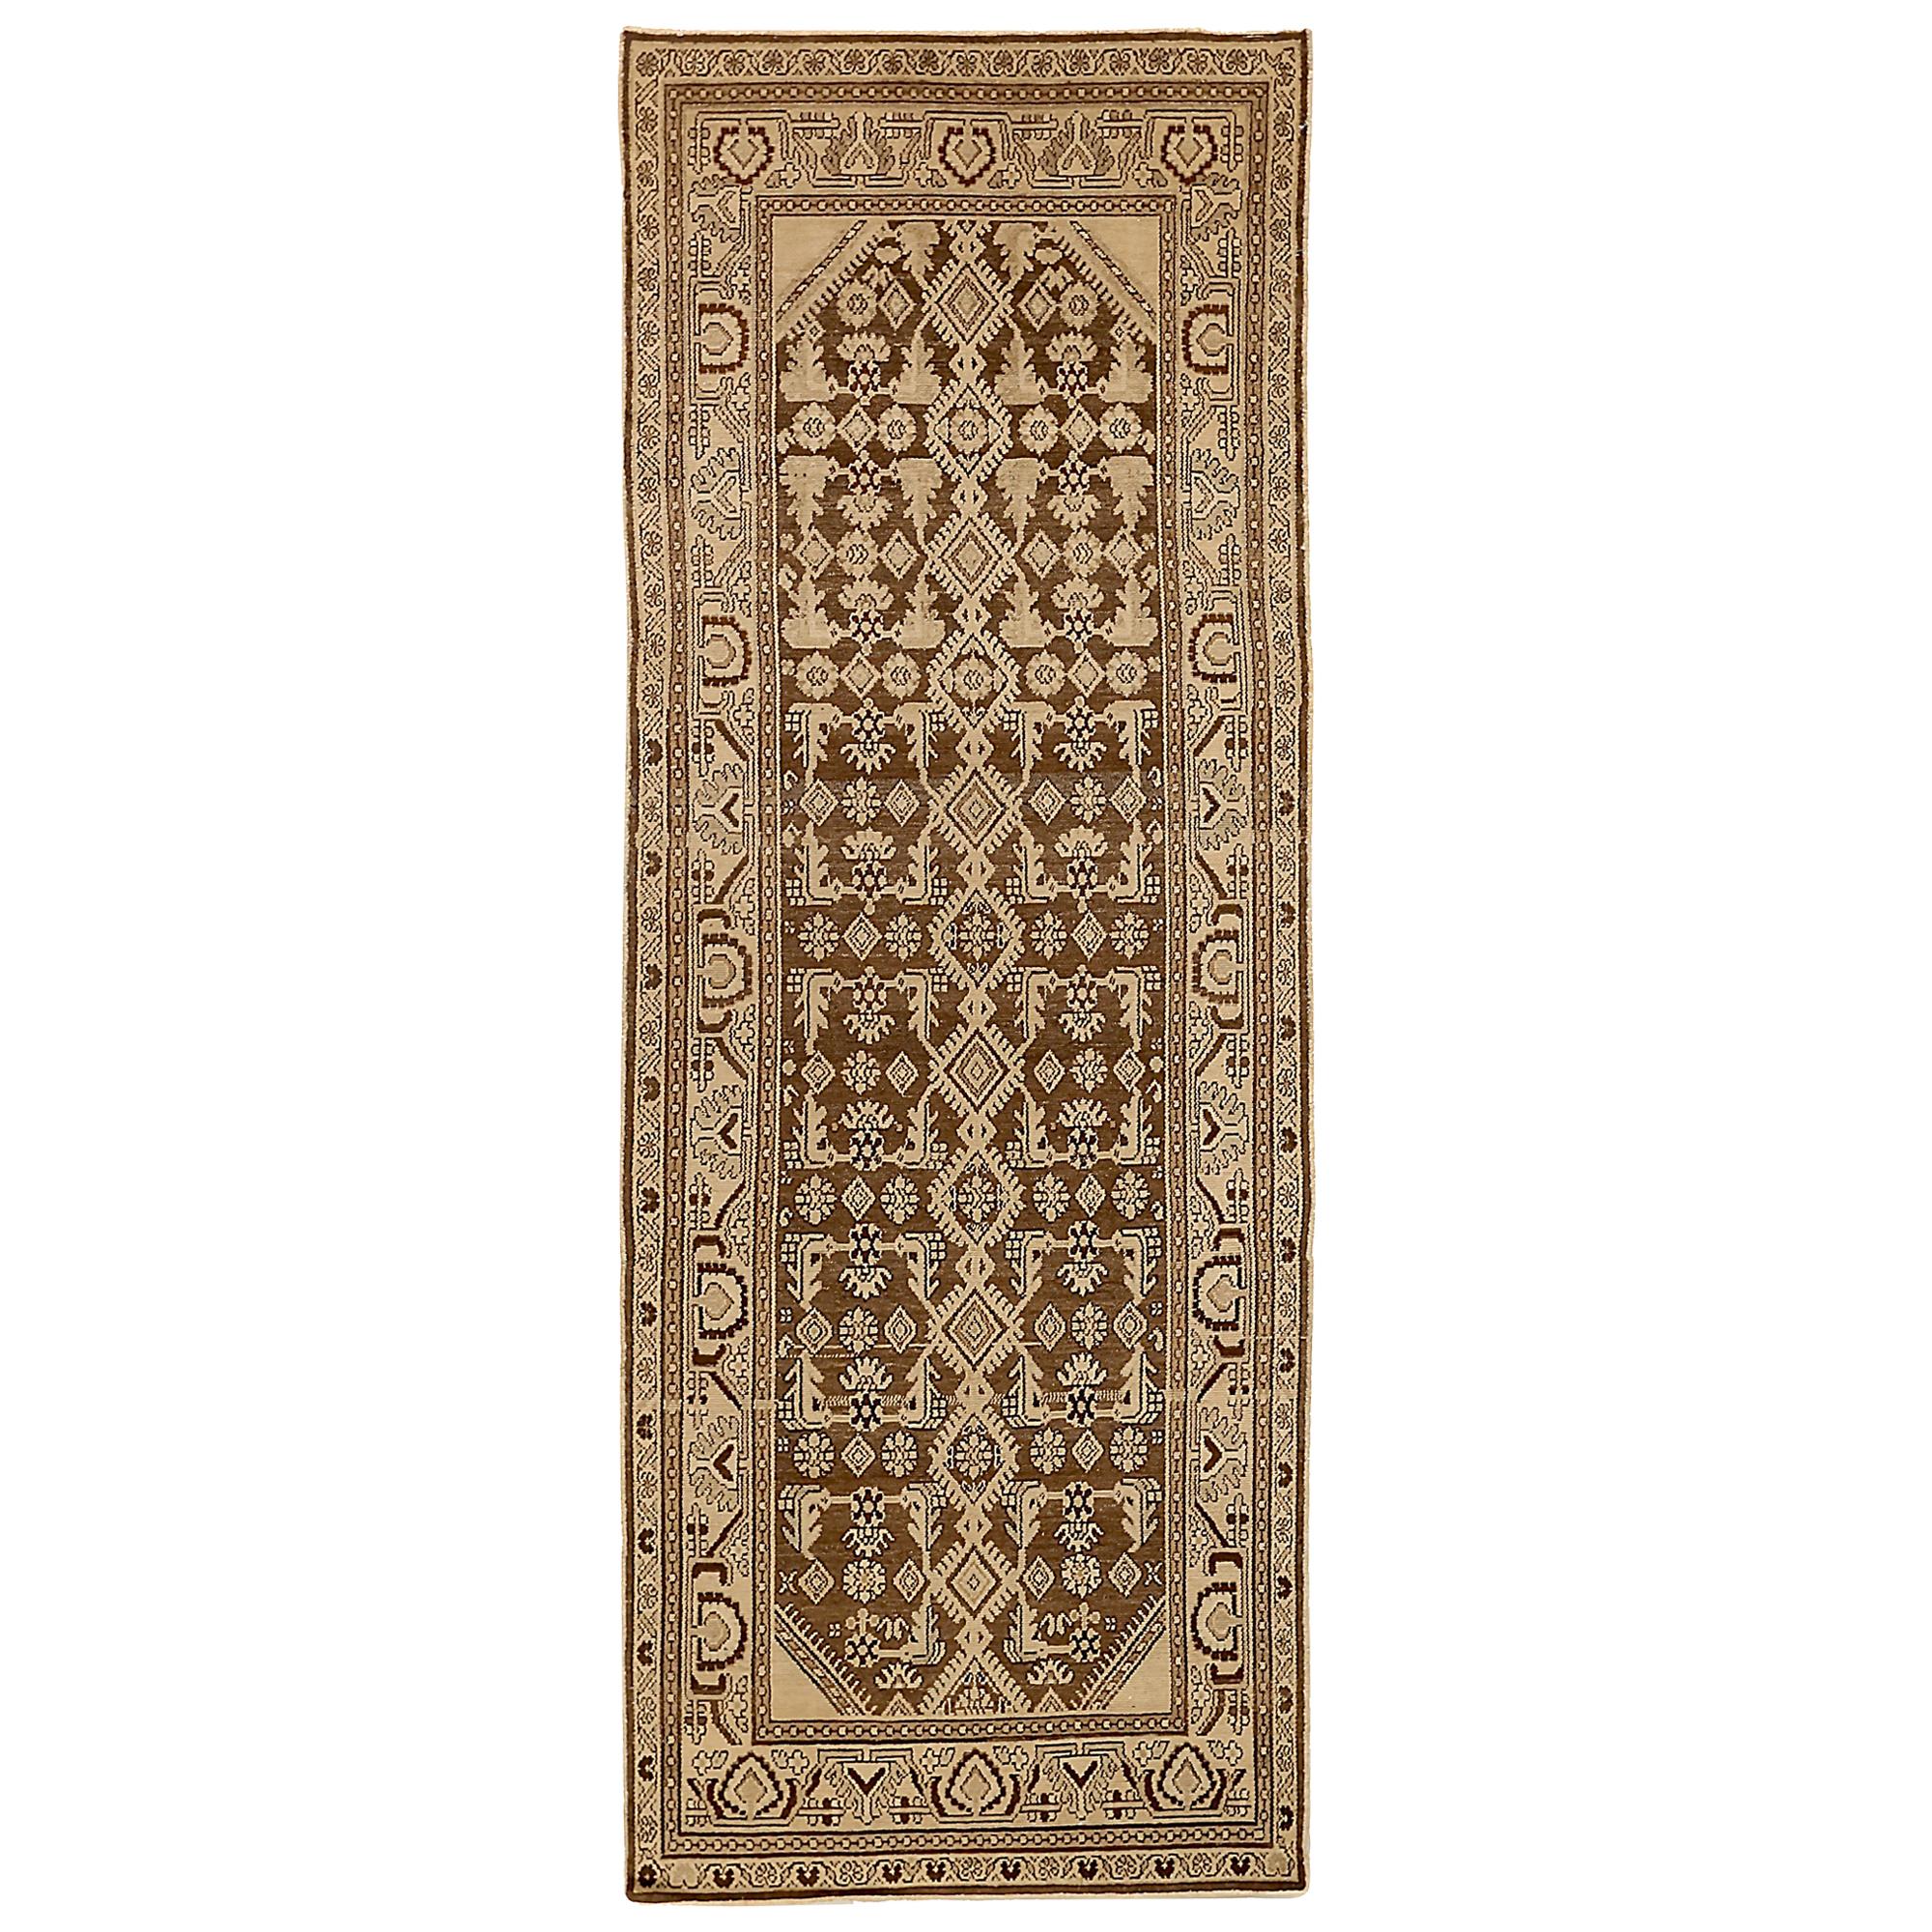 Antique Persian Malayer Area Rug with Tribal Design in Brown Field